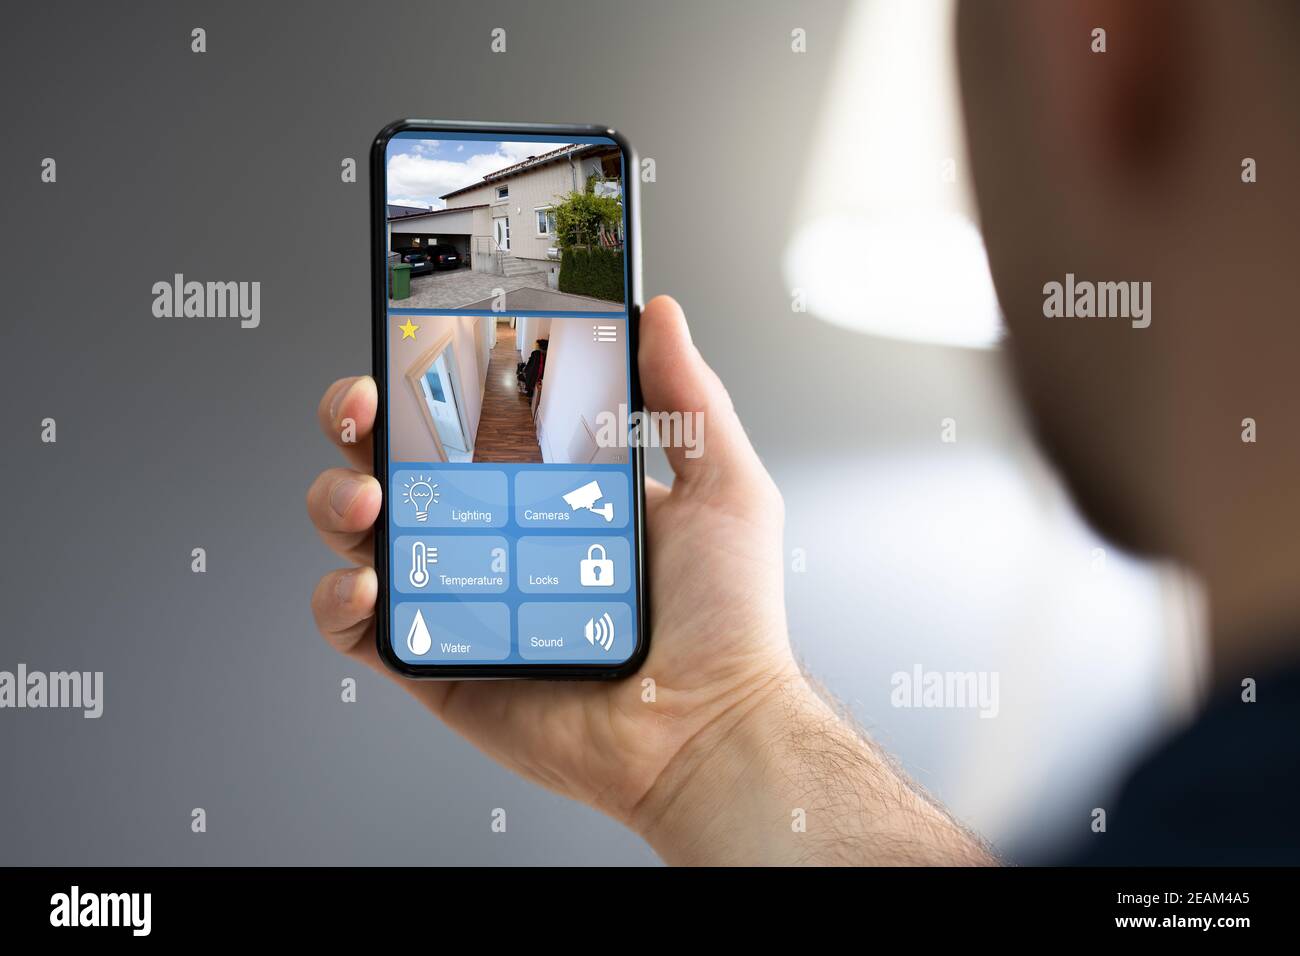 Smart Home CCTV Security On Mobile Phone Stock Photo